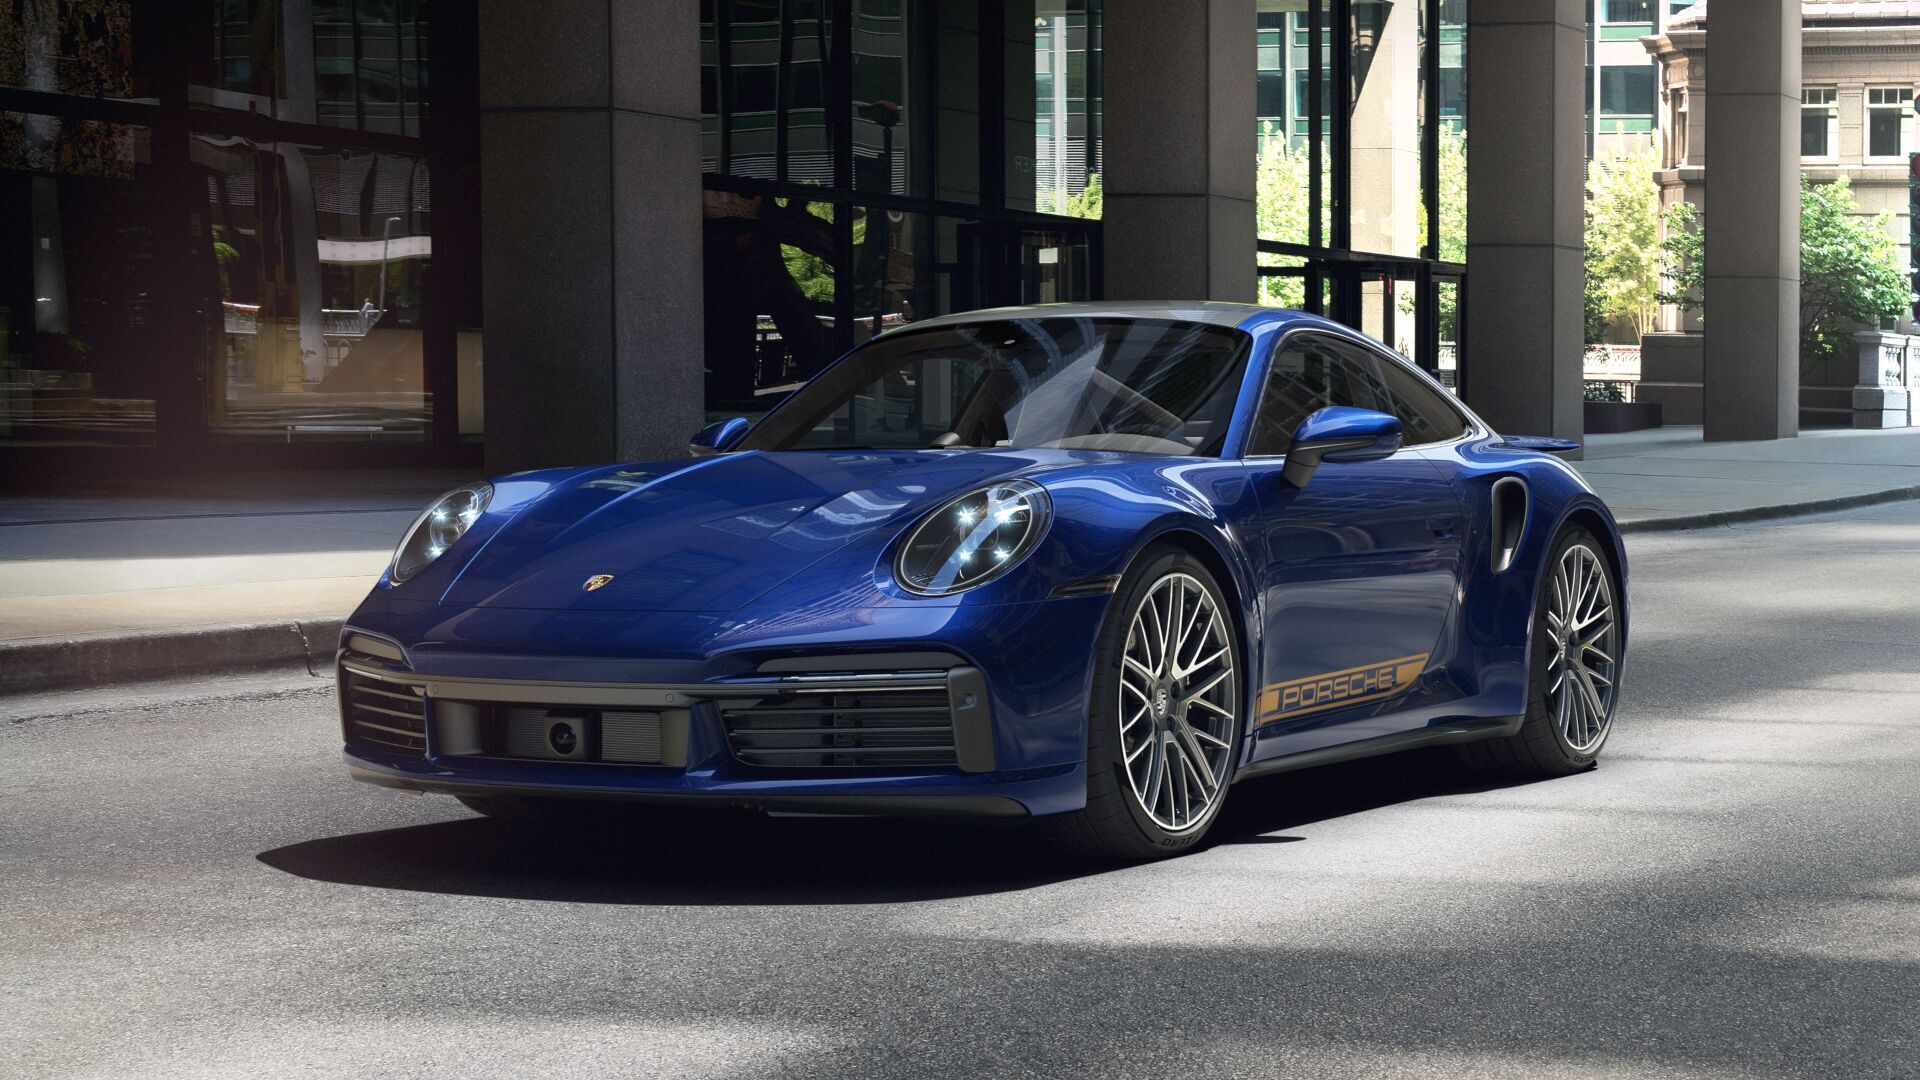 Gentian Blue Porsche 911 Turbo S in front of a city office building